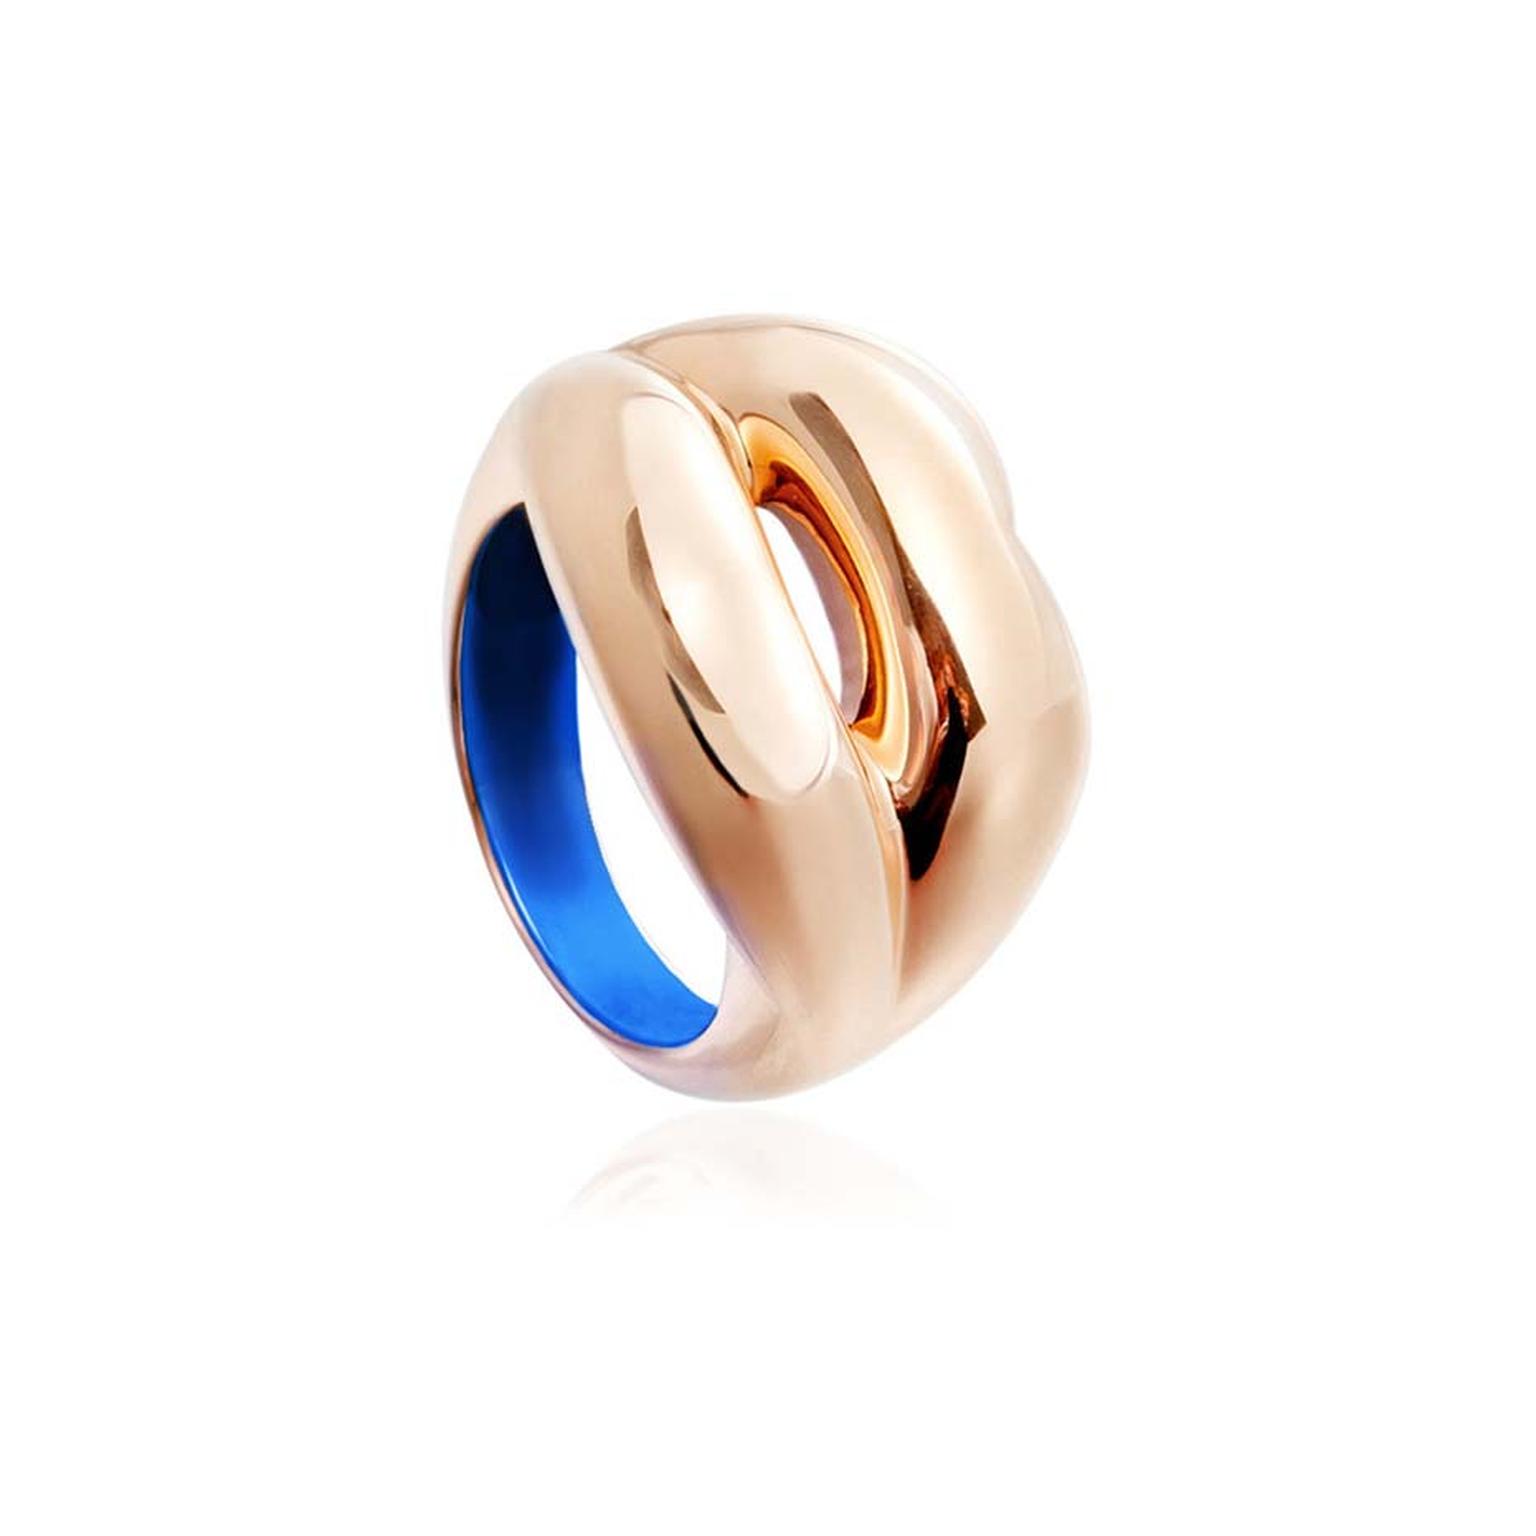 Solange Azagury-Partridge's iconic Hotlips ring in gold has been reworked to include the signature blue Paddle8 colour and is being auctioned with an estimate of £1,000-£1,500. To bid now, follow the link in the article.